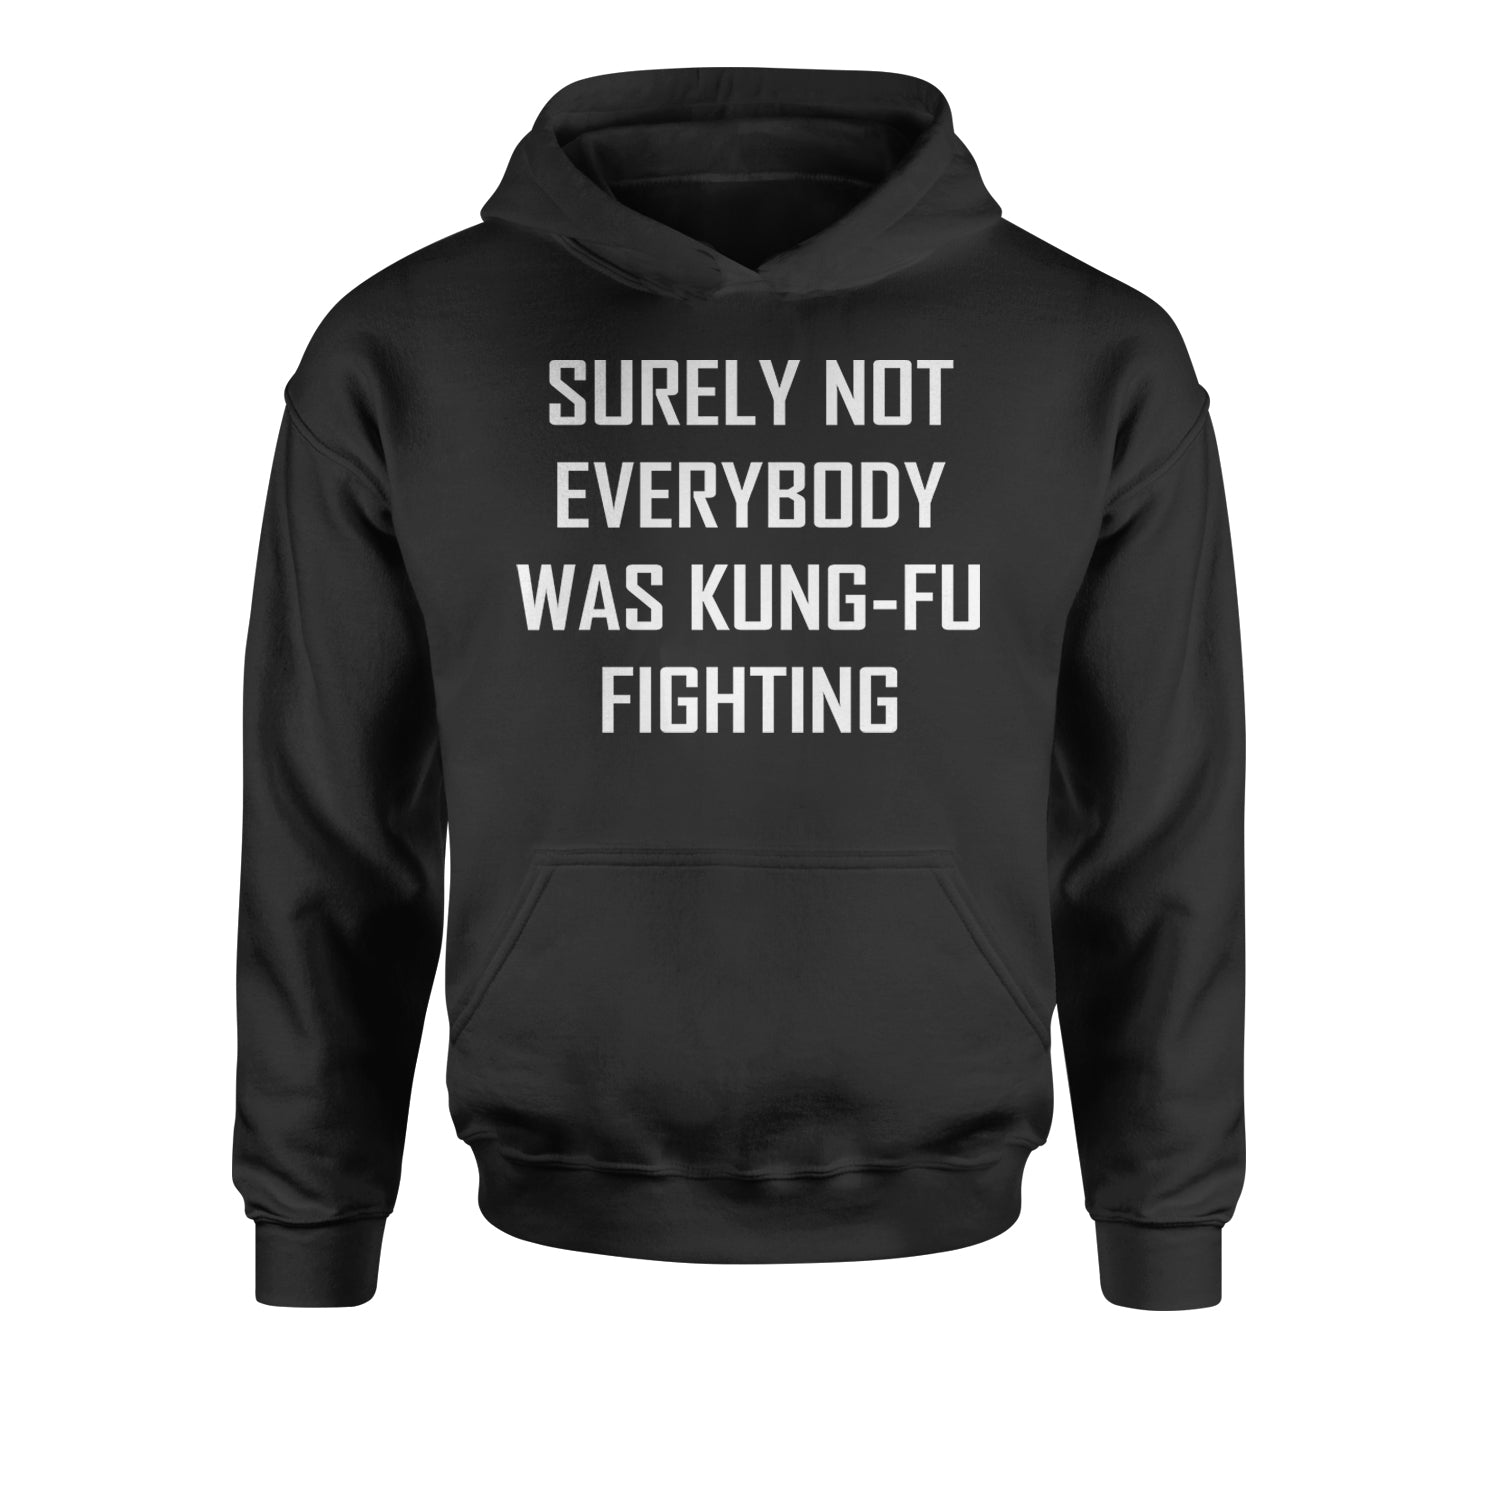 Surely Not Everybody Was Kung-Fu Fighting  Youth-Sized Hoodie